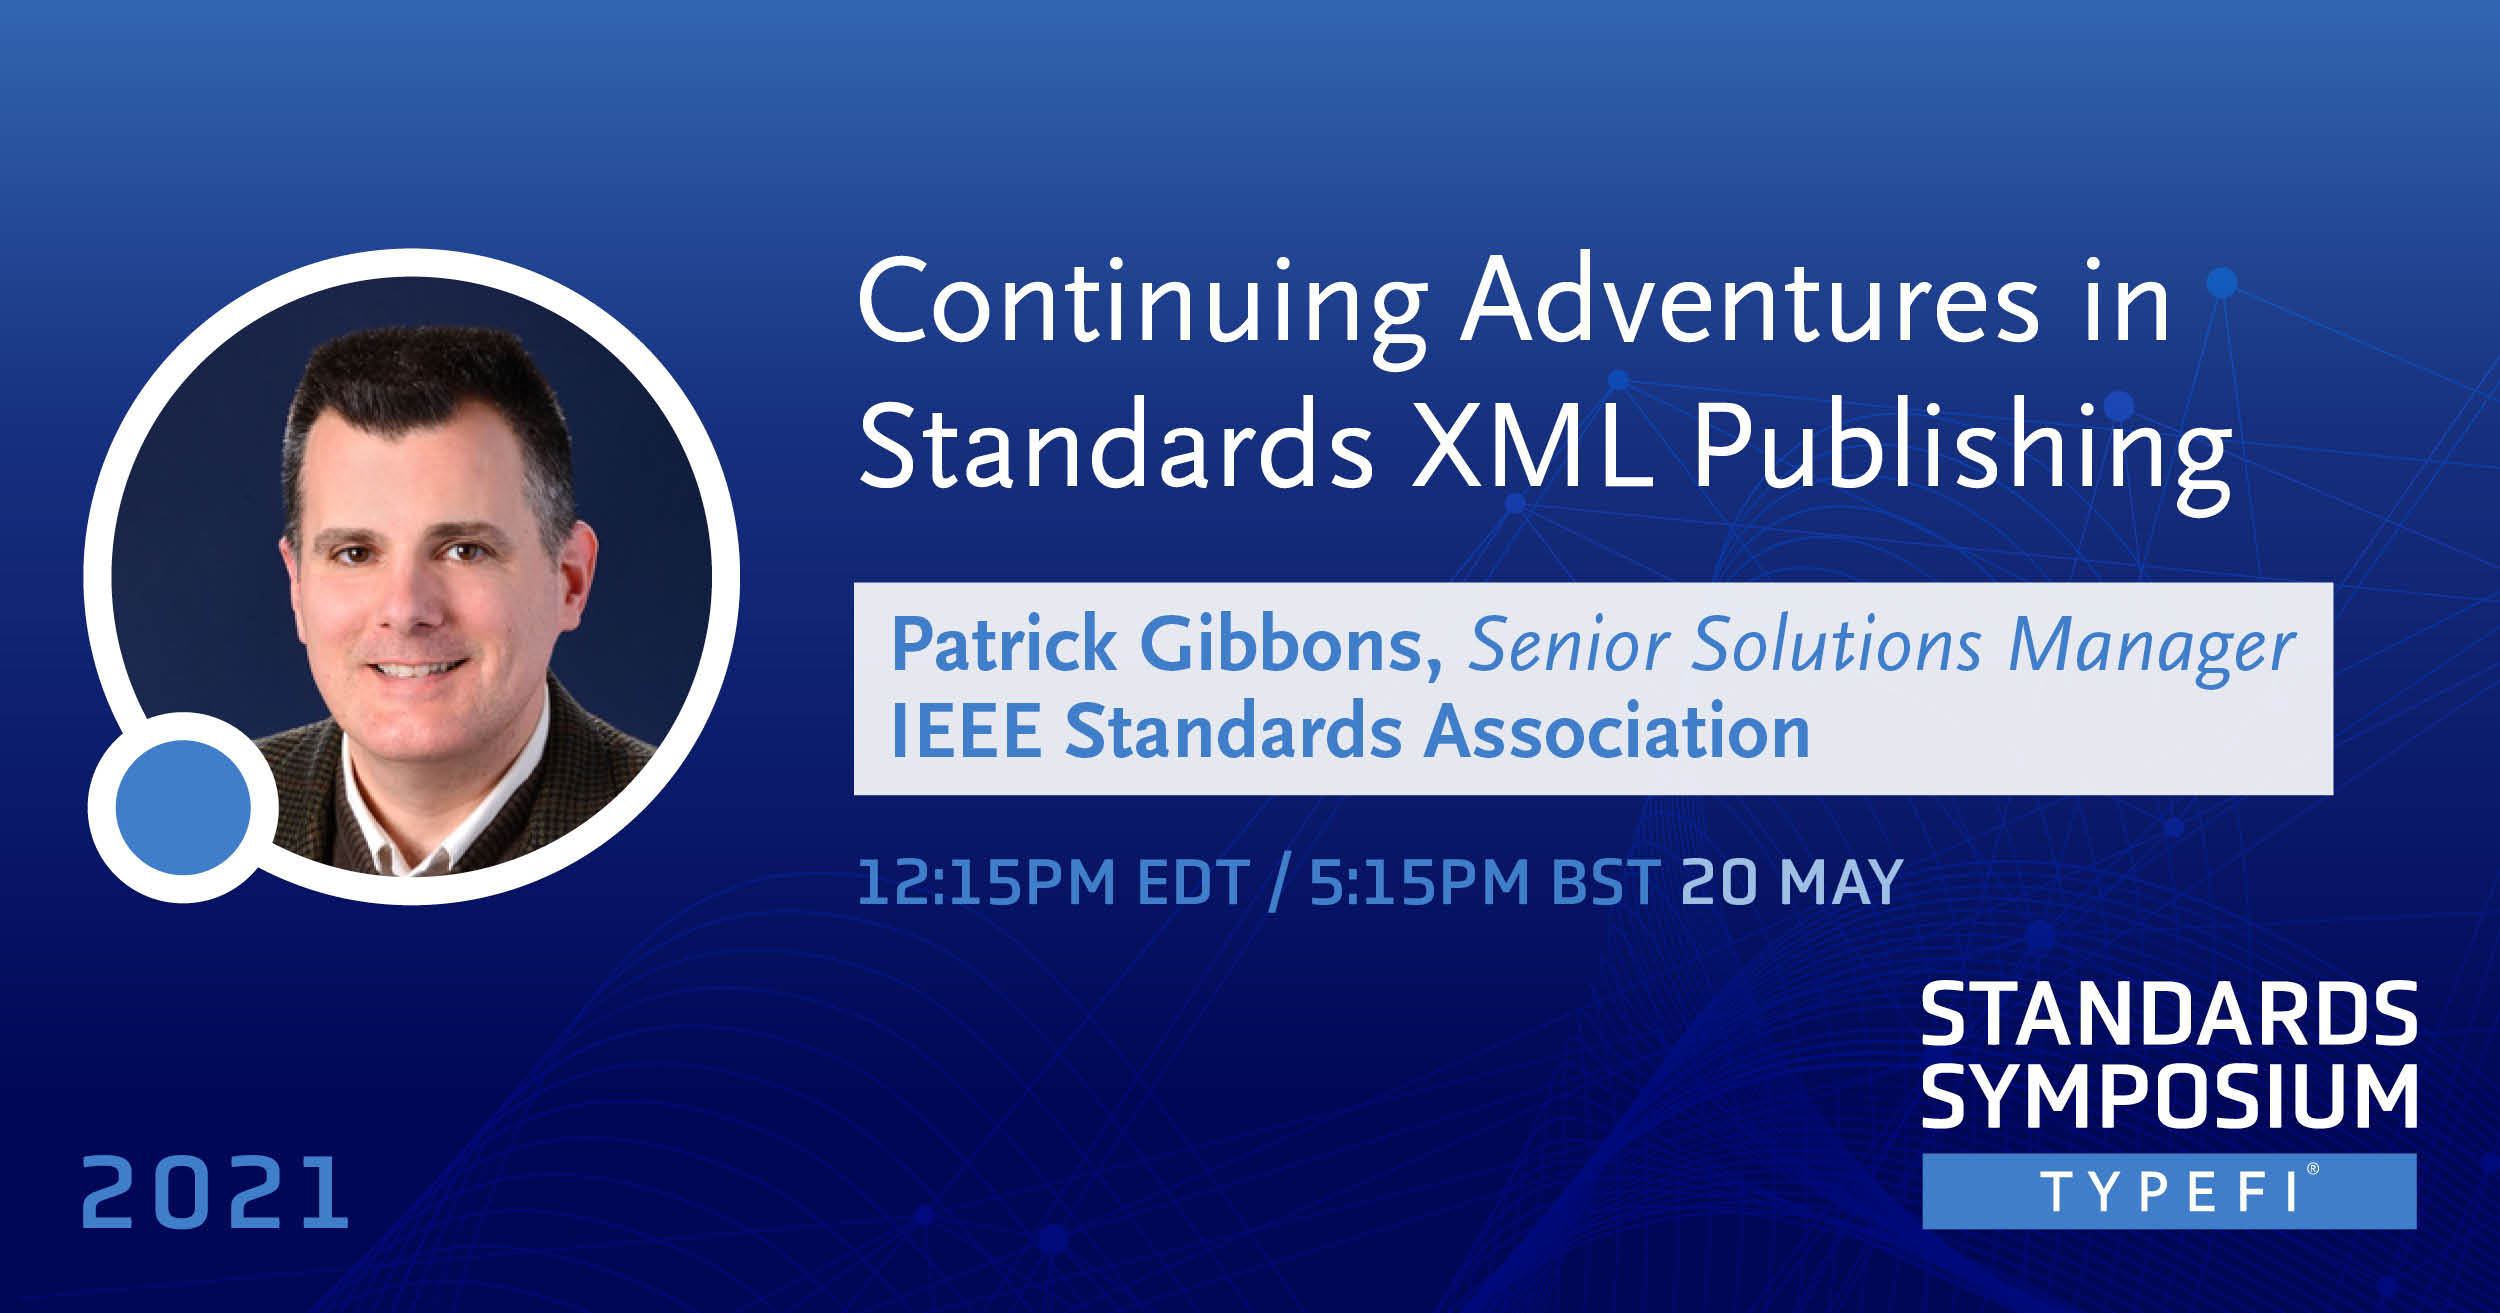 Promotional image for Patrick Gibbons' Presentation - Continuing Adventures in Standards XML Publishing, for the Typefi Standards Symposium 2021